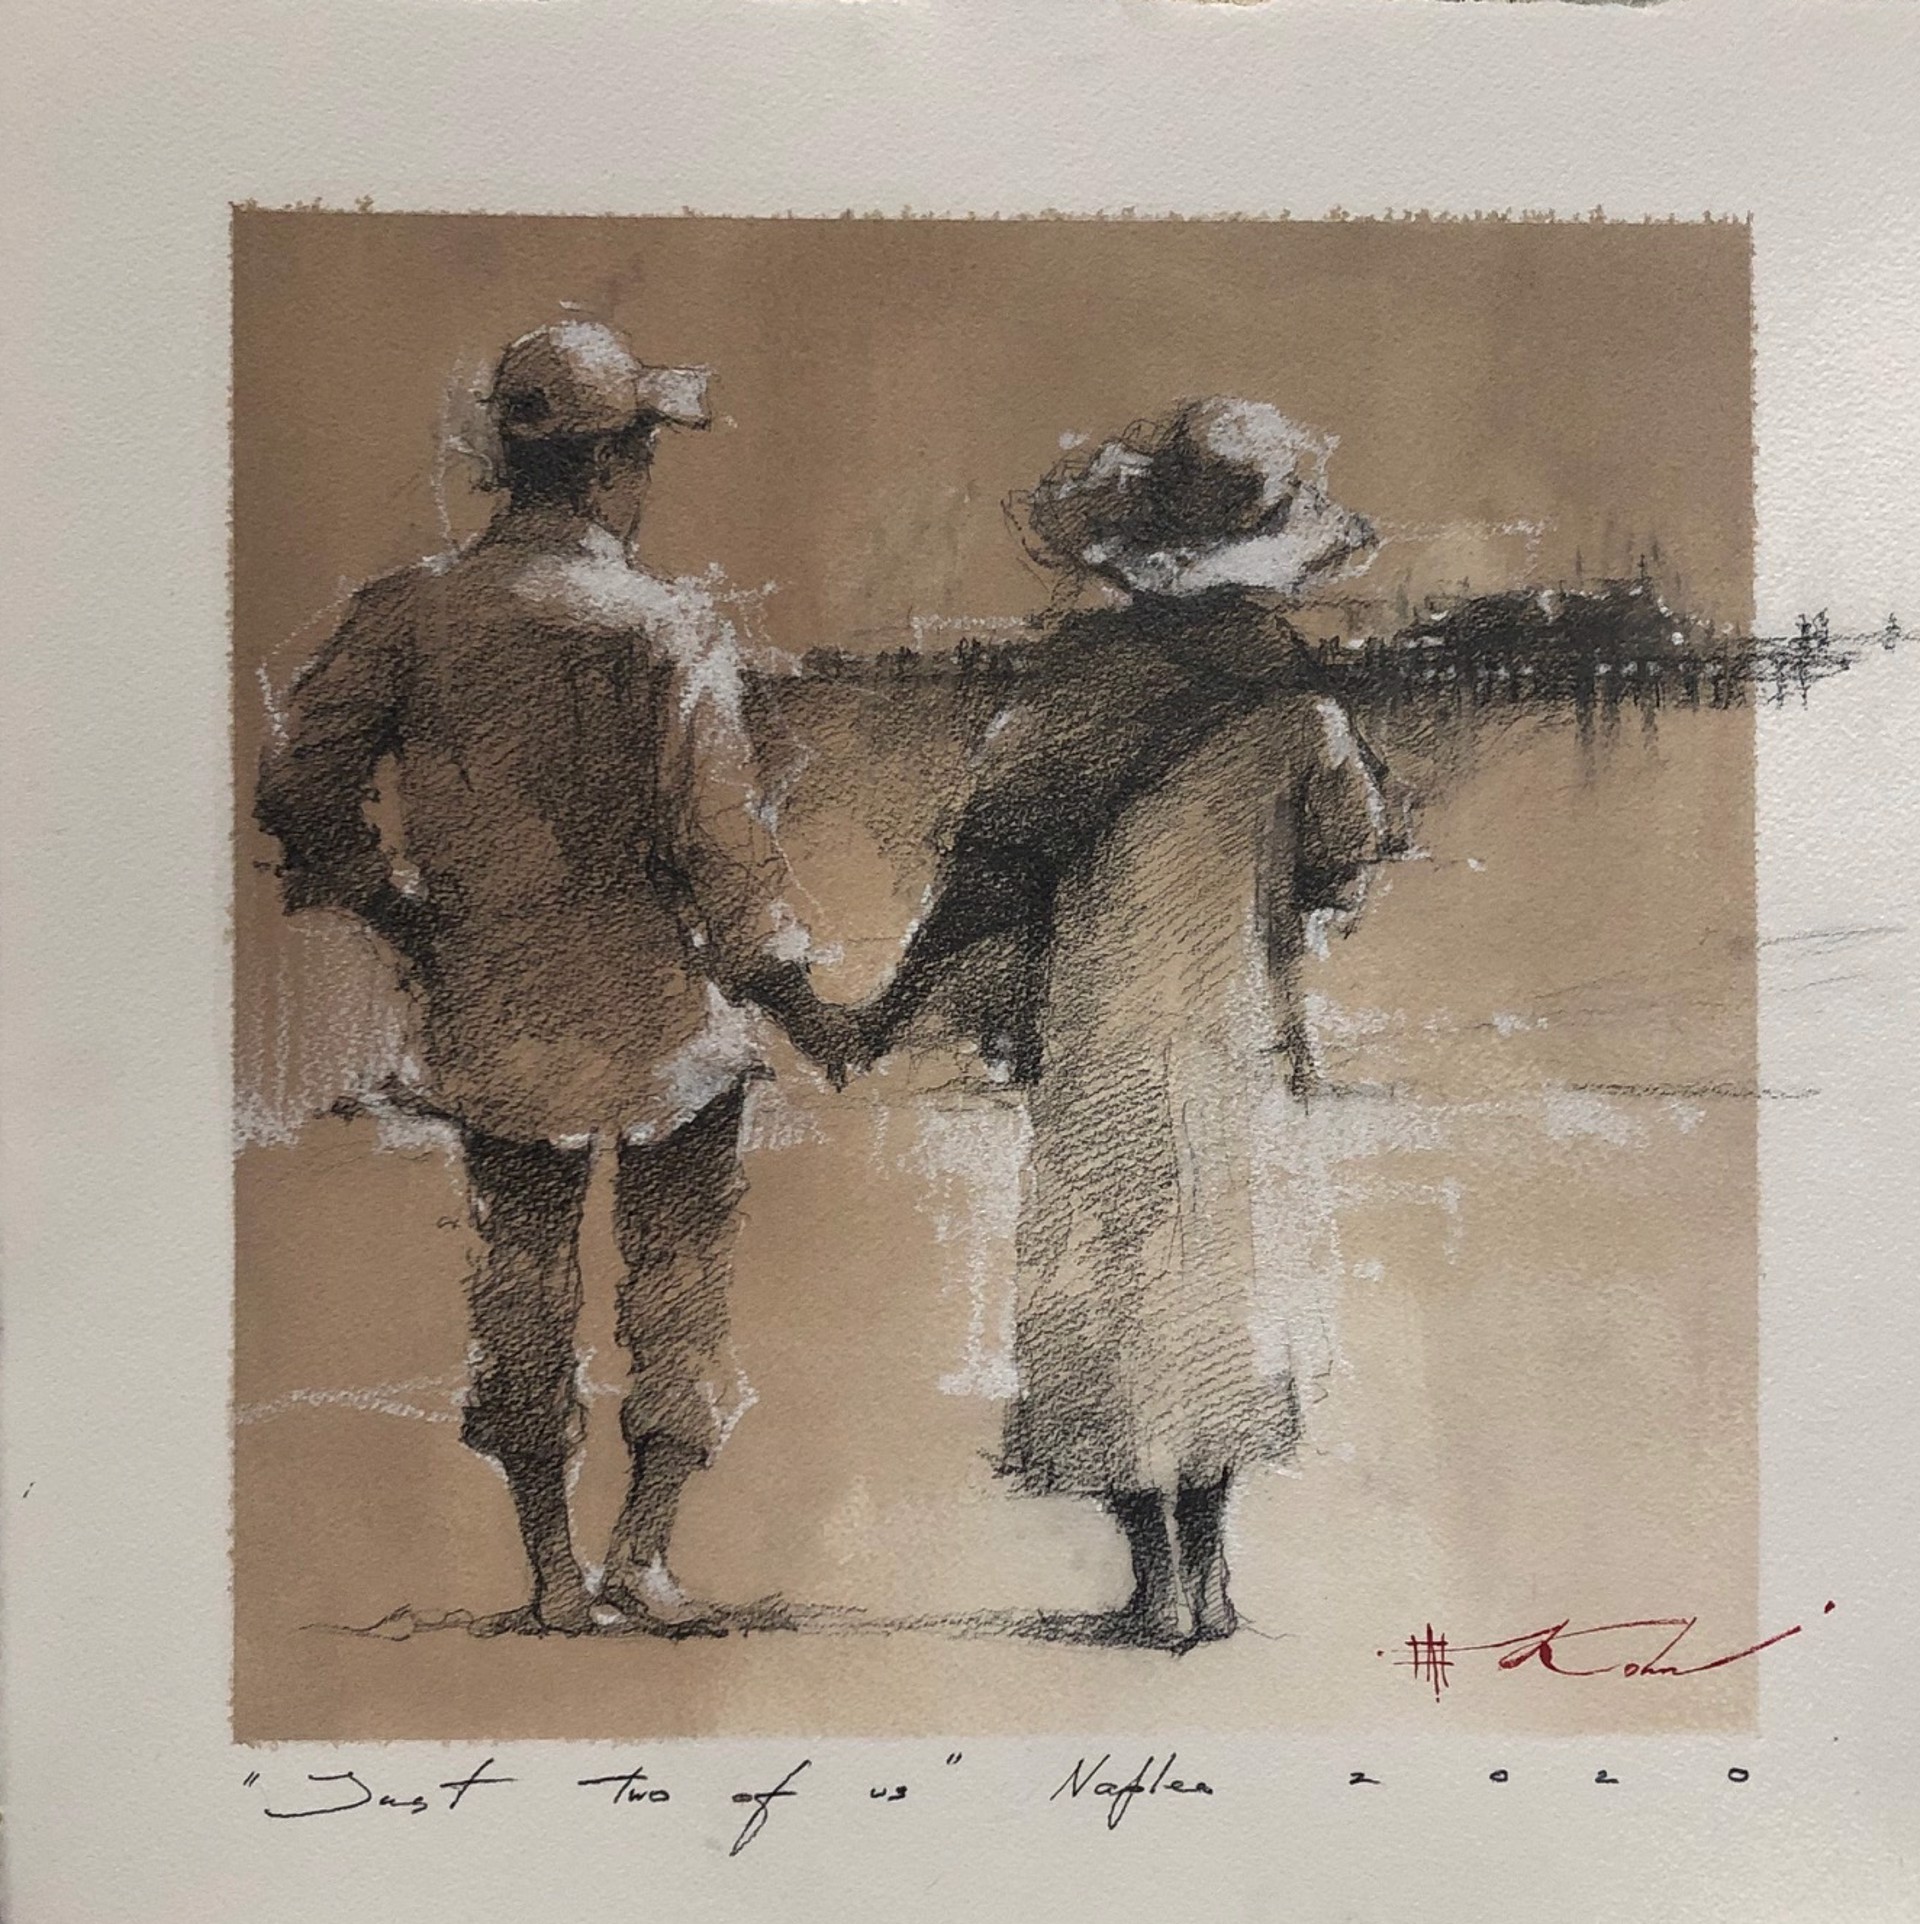 "Just Two of Us" Naples  by Andre Kohn